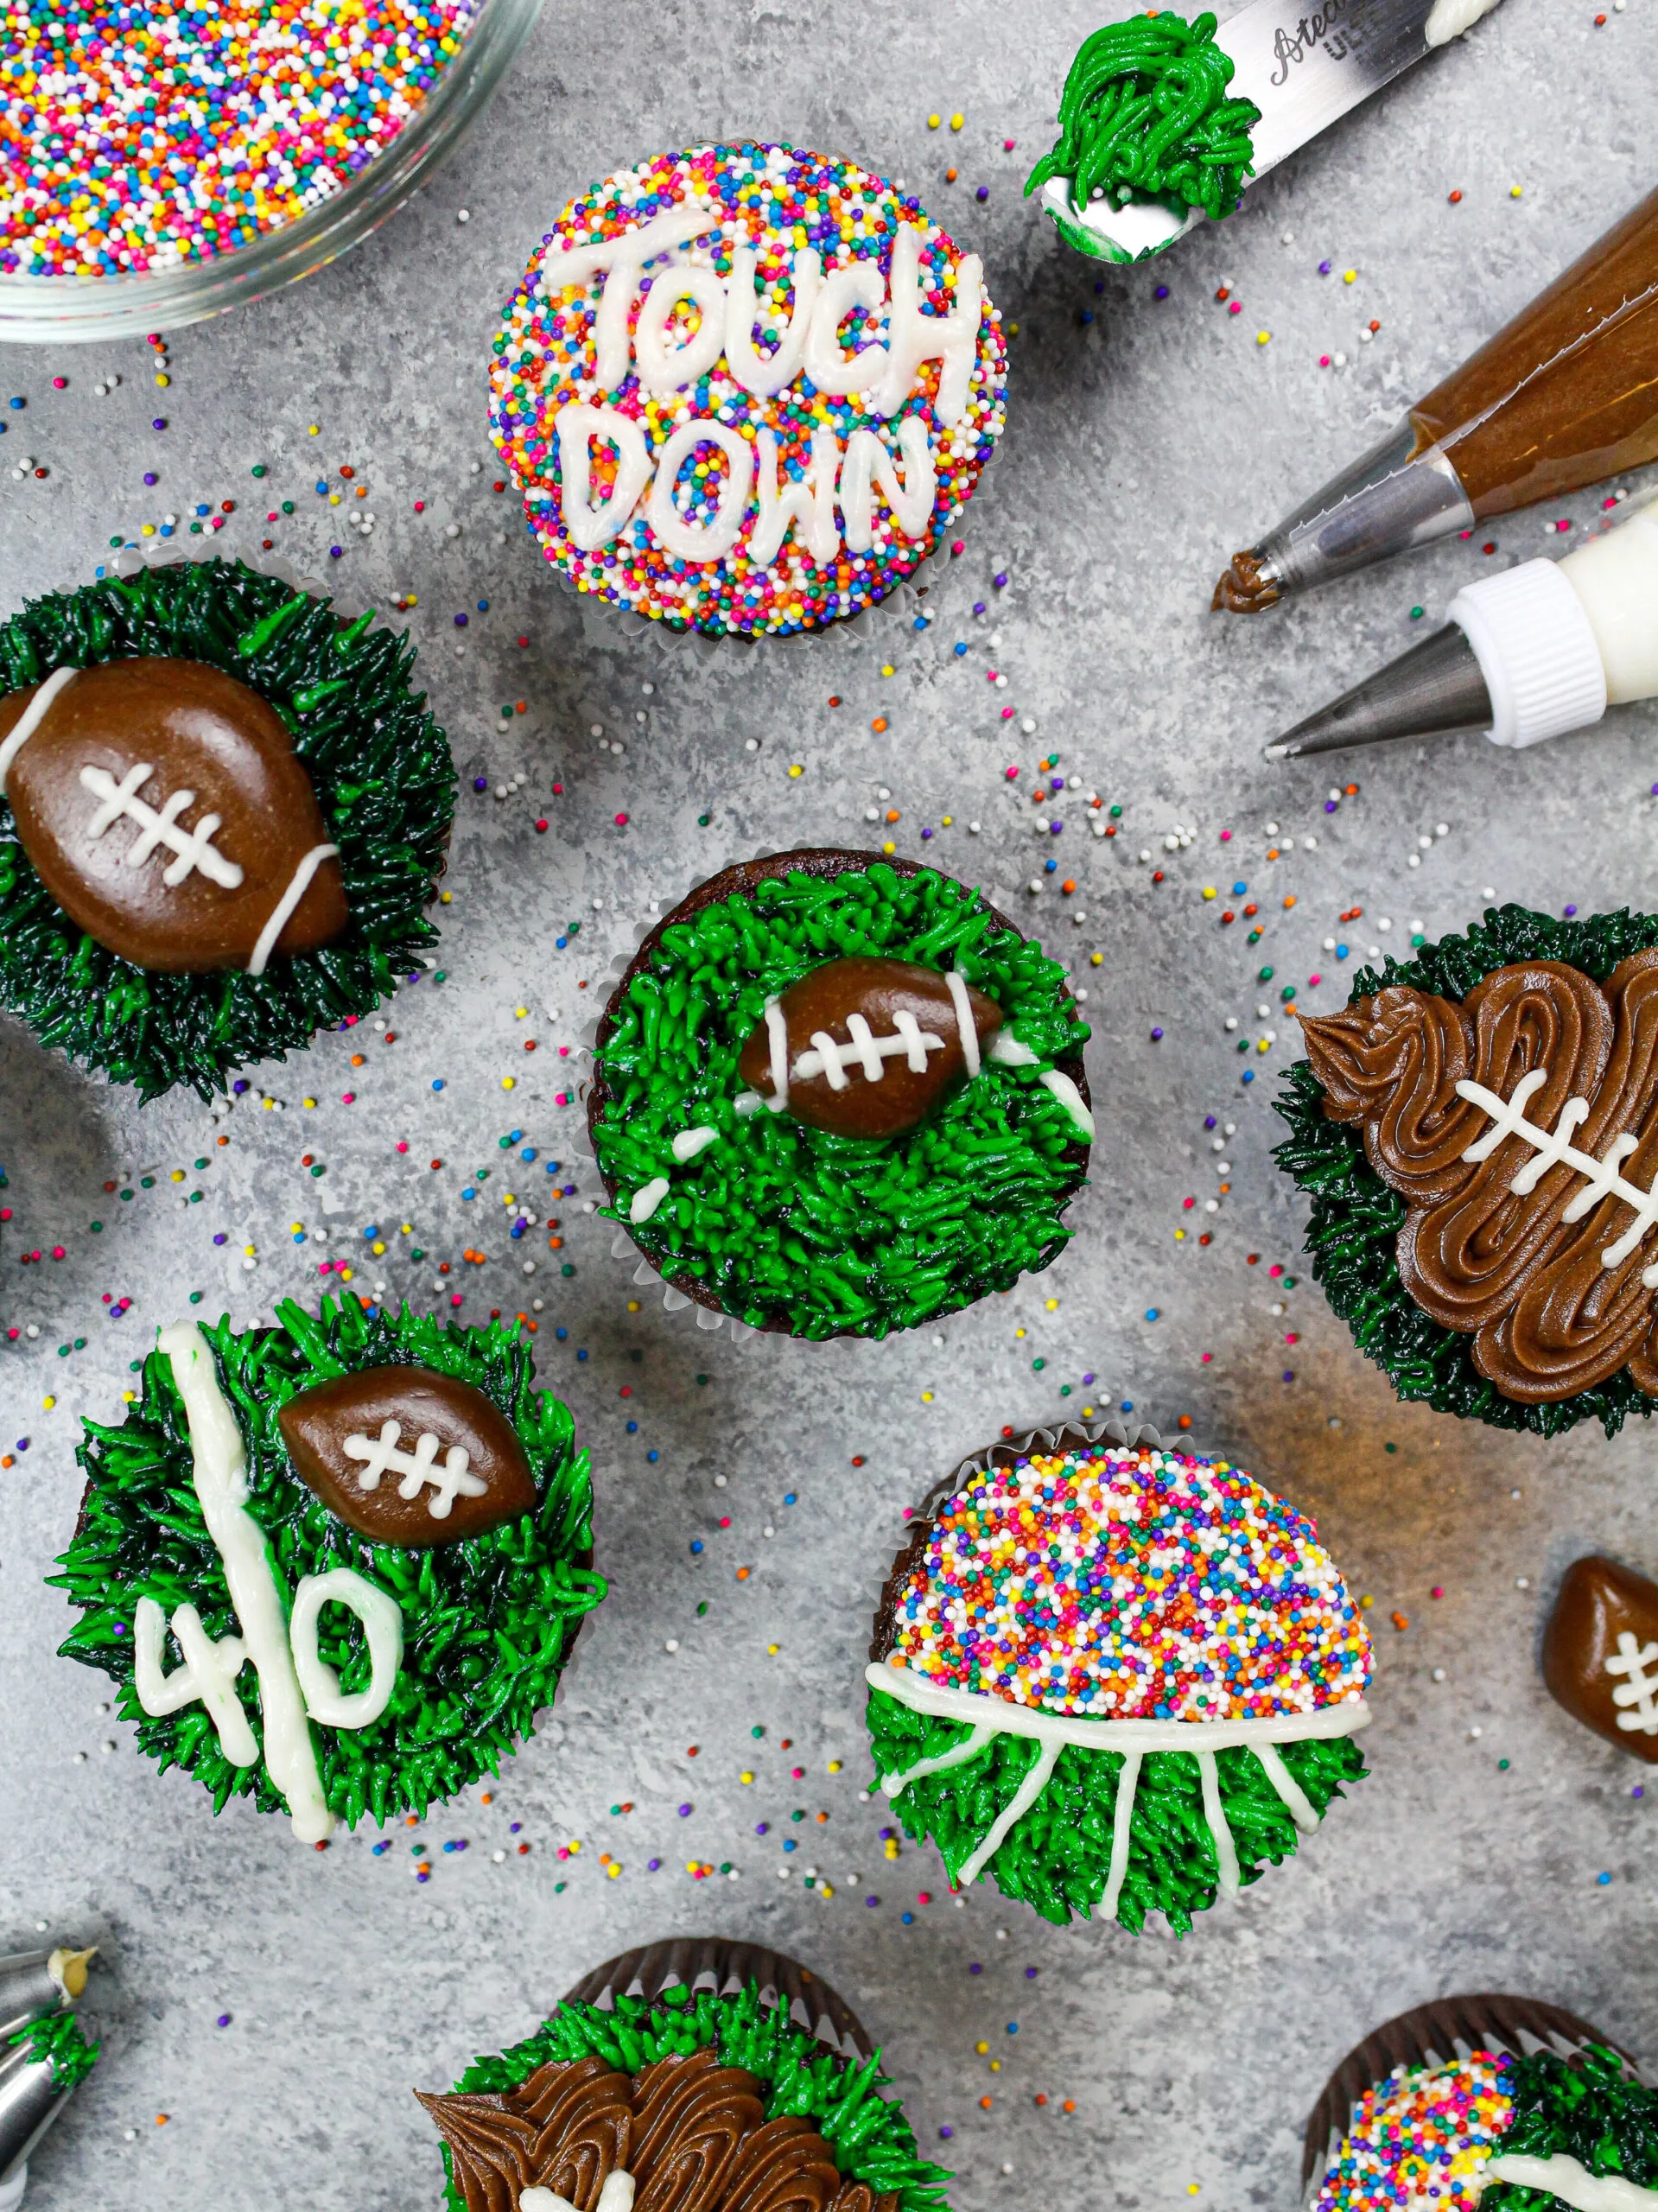 image of football cupcakes decorated with buttercream for the superbowl